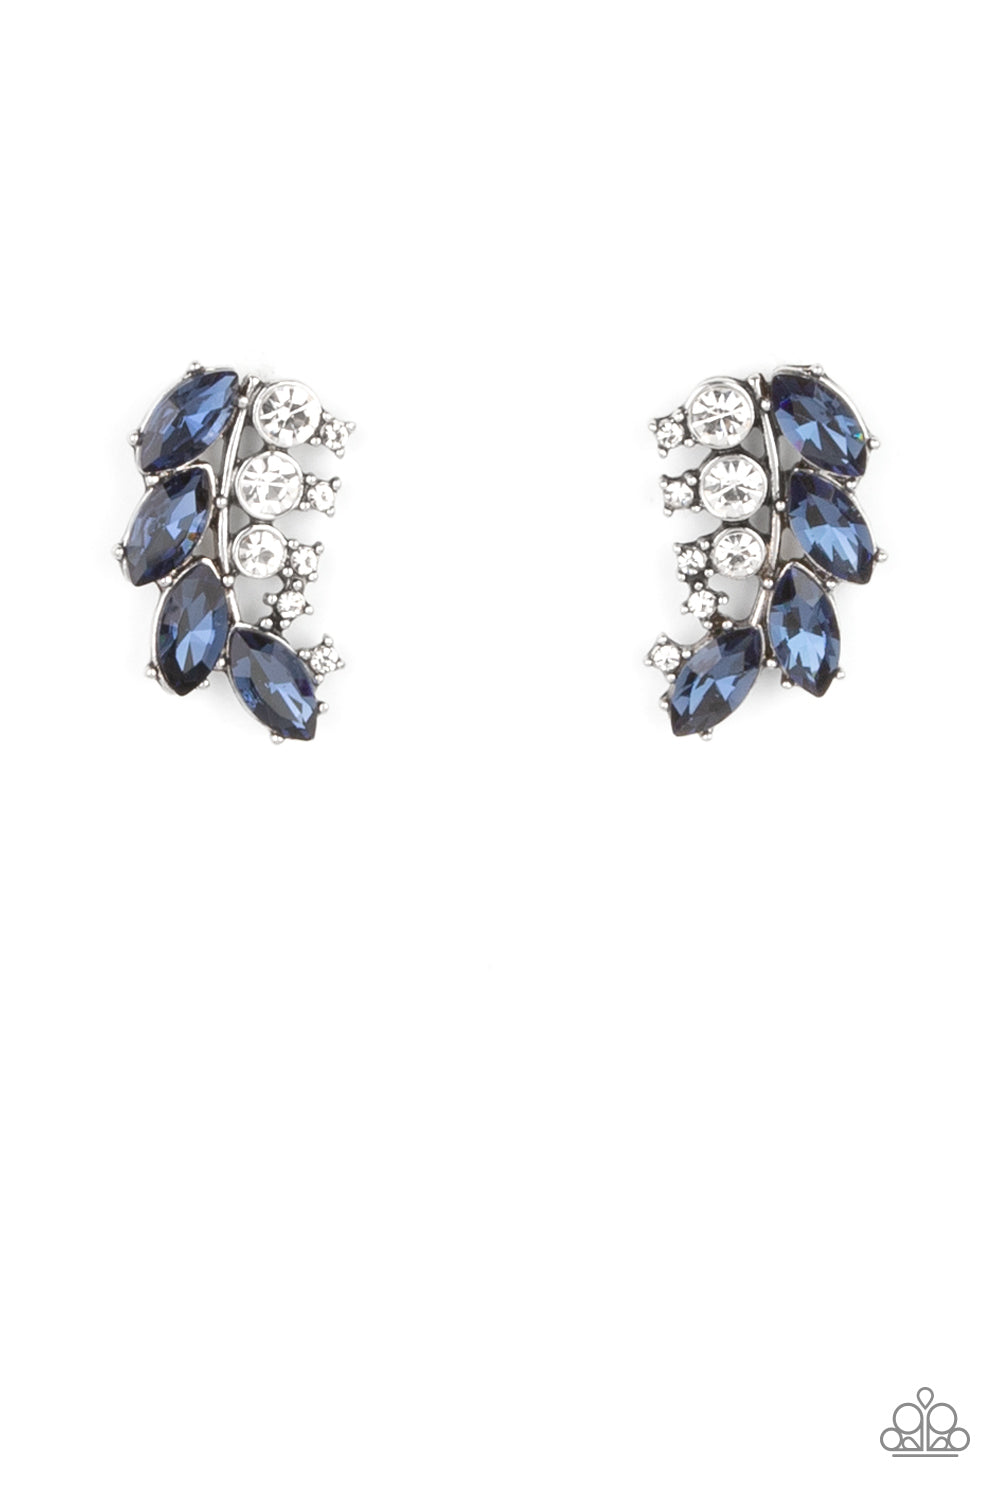 A frond of dazzling blue marquise and round white rhinestones delicately curves below the ear